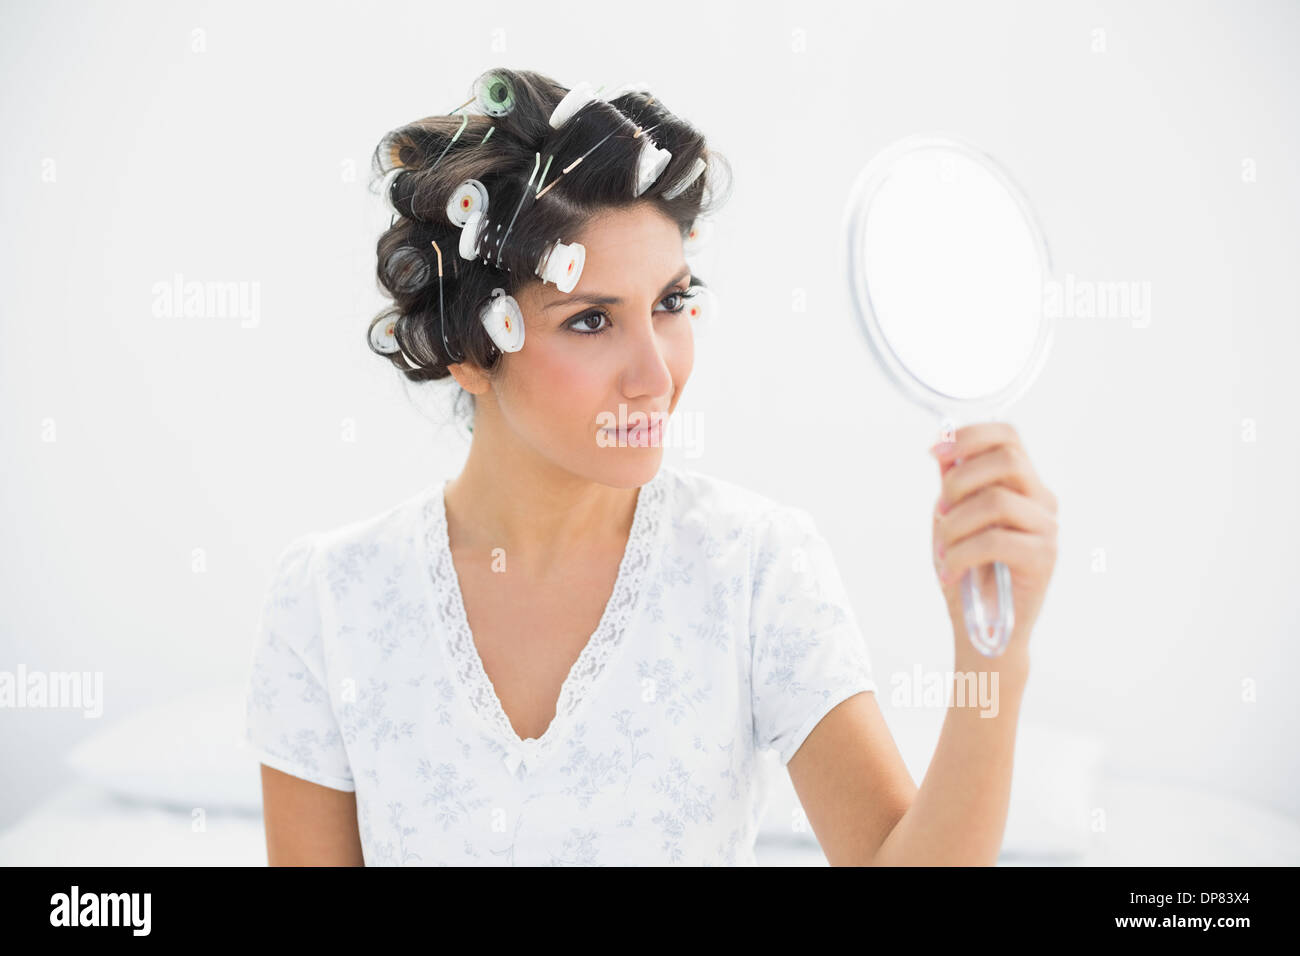 Happy brunette in hair rollers holding hand mirror Stock Photo